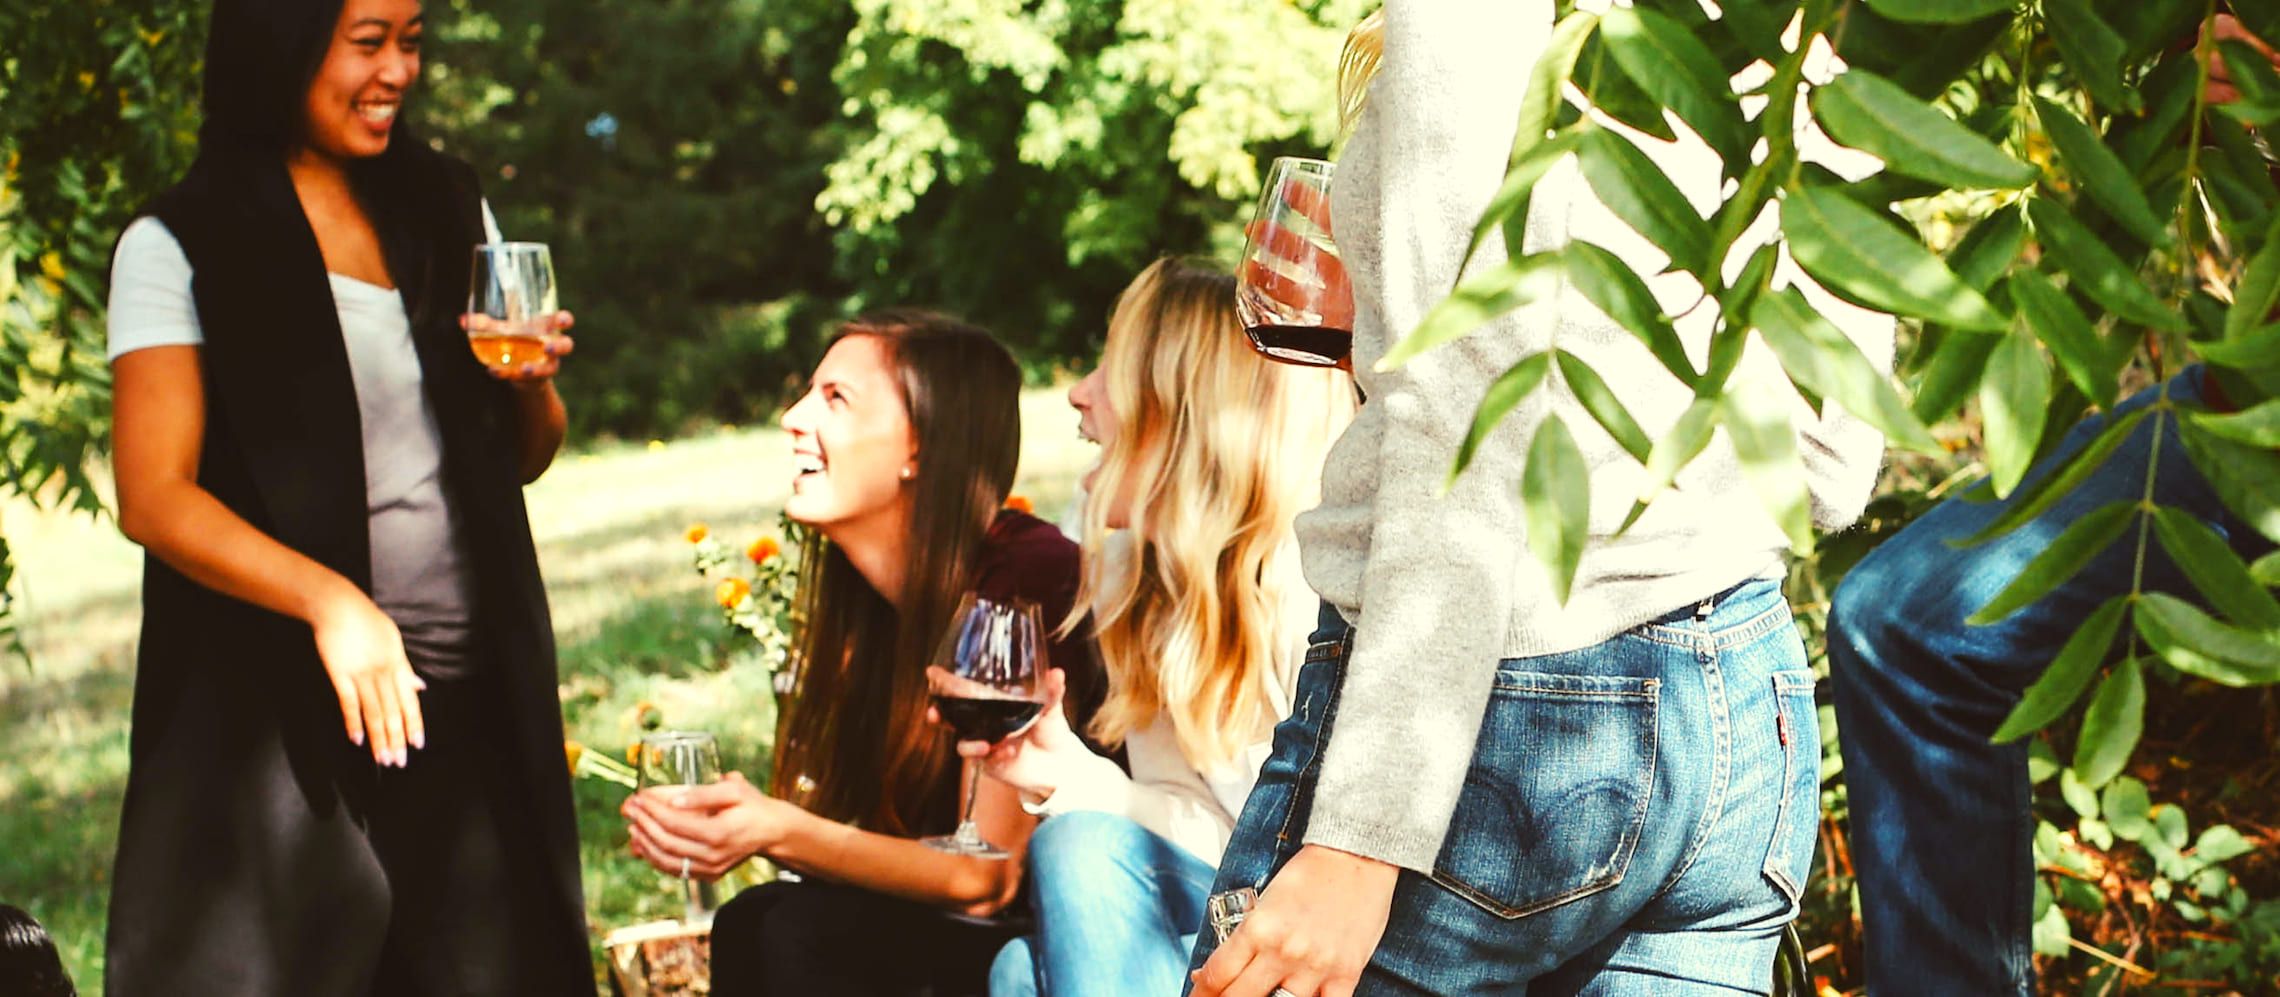 Photo for: Millennials’ Influence on Wine Selling